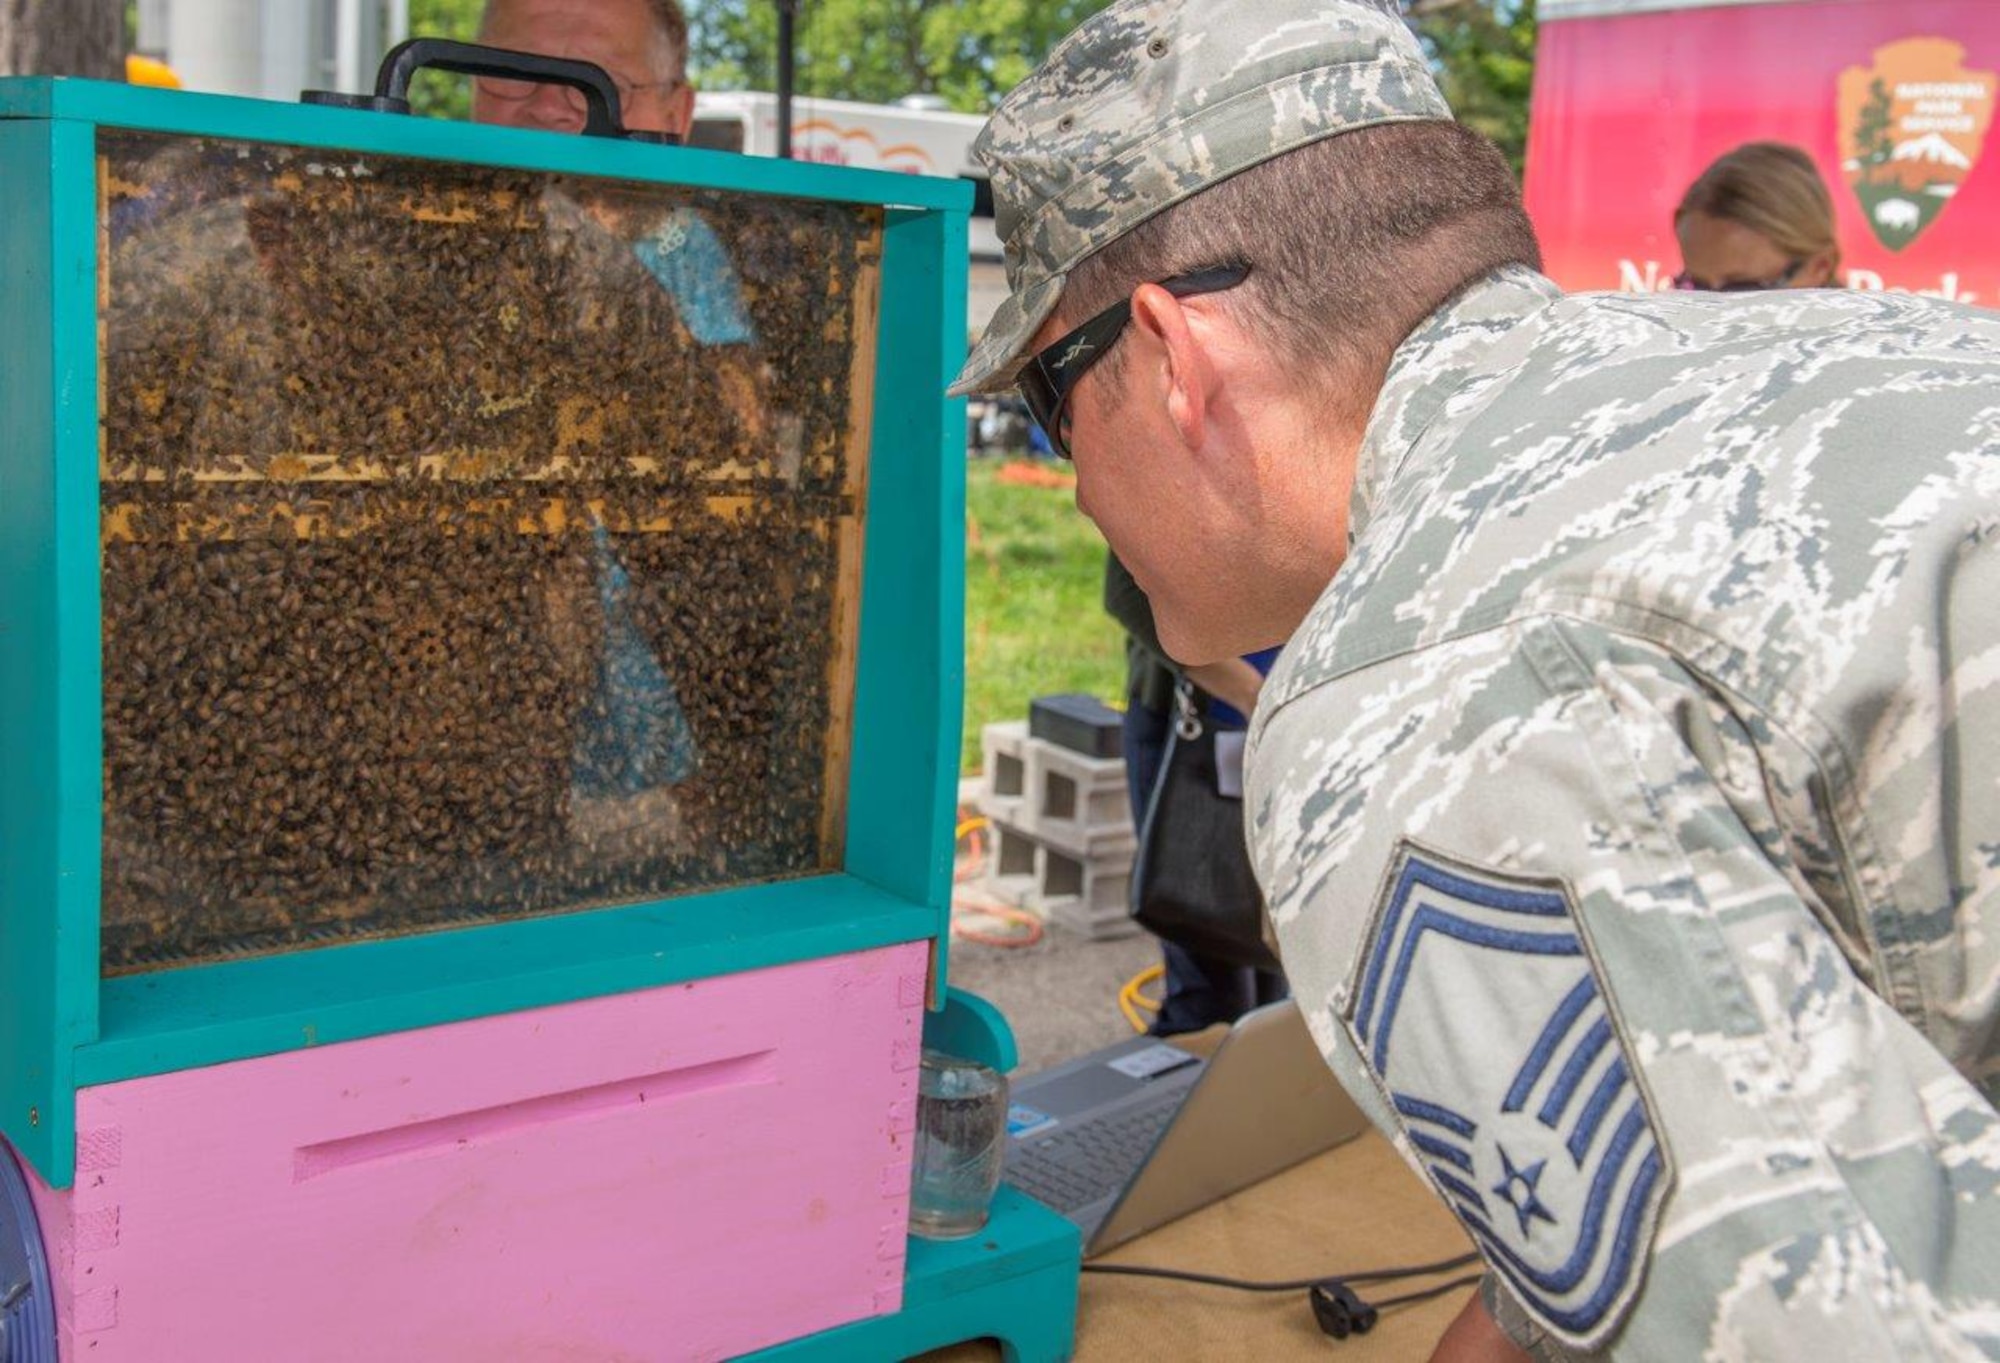 Senior Master Sgt. Benjamin Trevino,Air Force Materiel Command chaplain assistant functional manager, observes a live demonstration hive at the Pollinator Expo held at the Wright Brothers MemorialJune 21. Pollinators, also known as bees are vital to the pollination process of a third of the food people consume such as fruits,vegetables and nuts. (U.S.Air Force photo/Michelle Gigante)